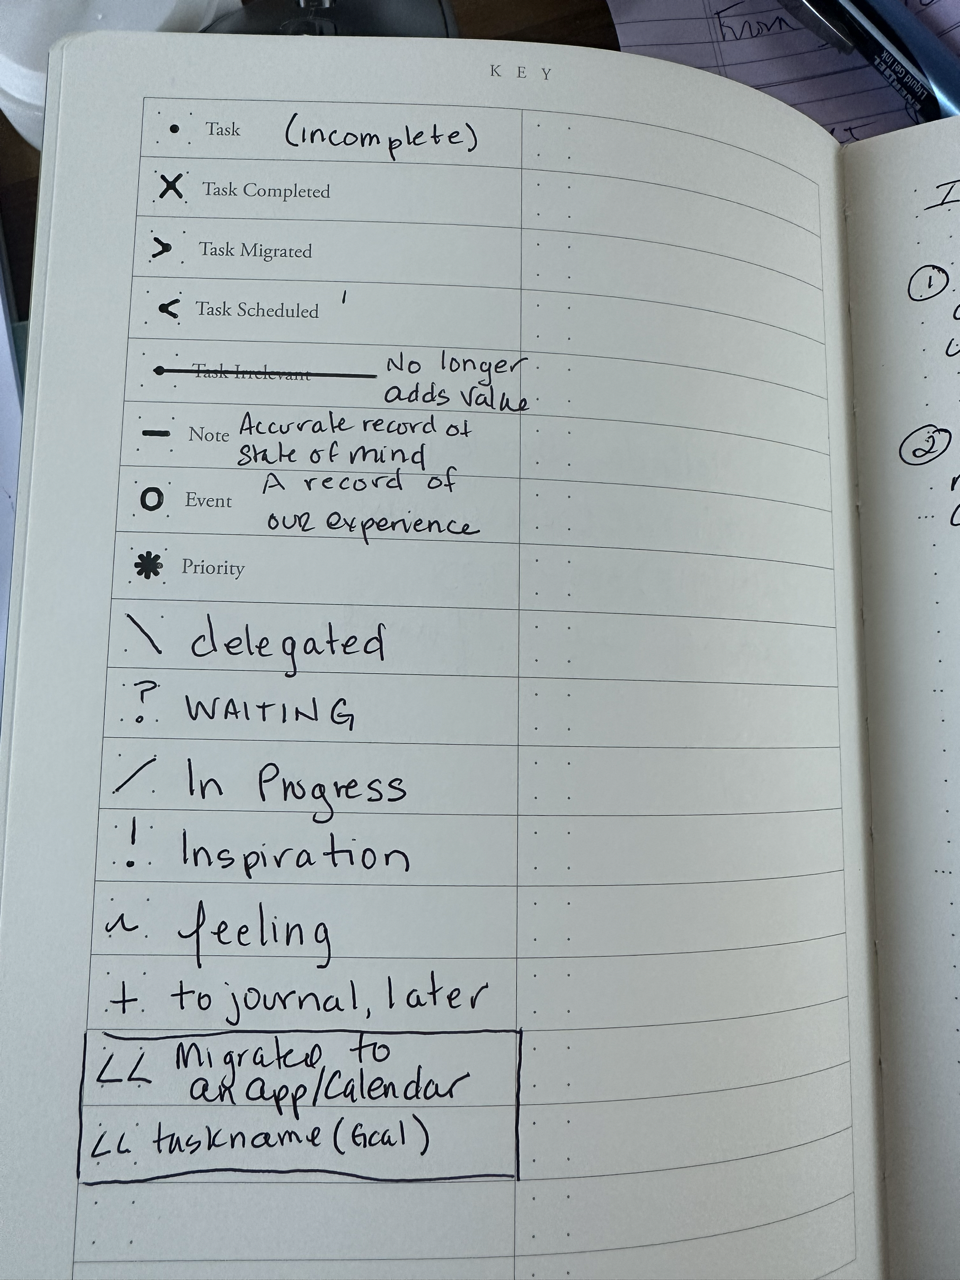 Signifiers used in Bullet Journaling